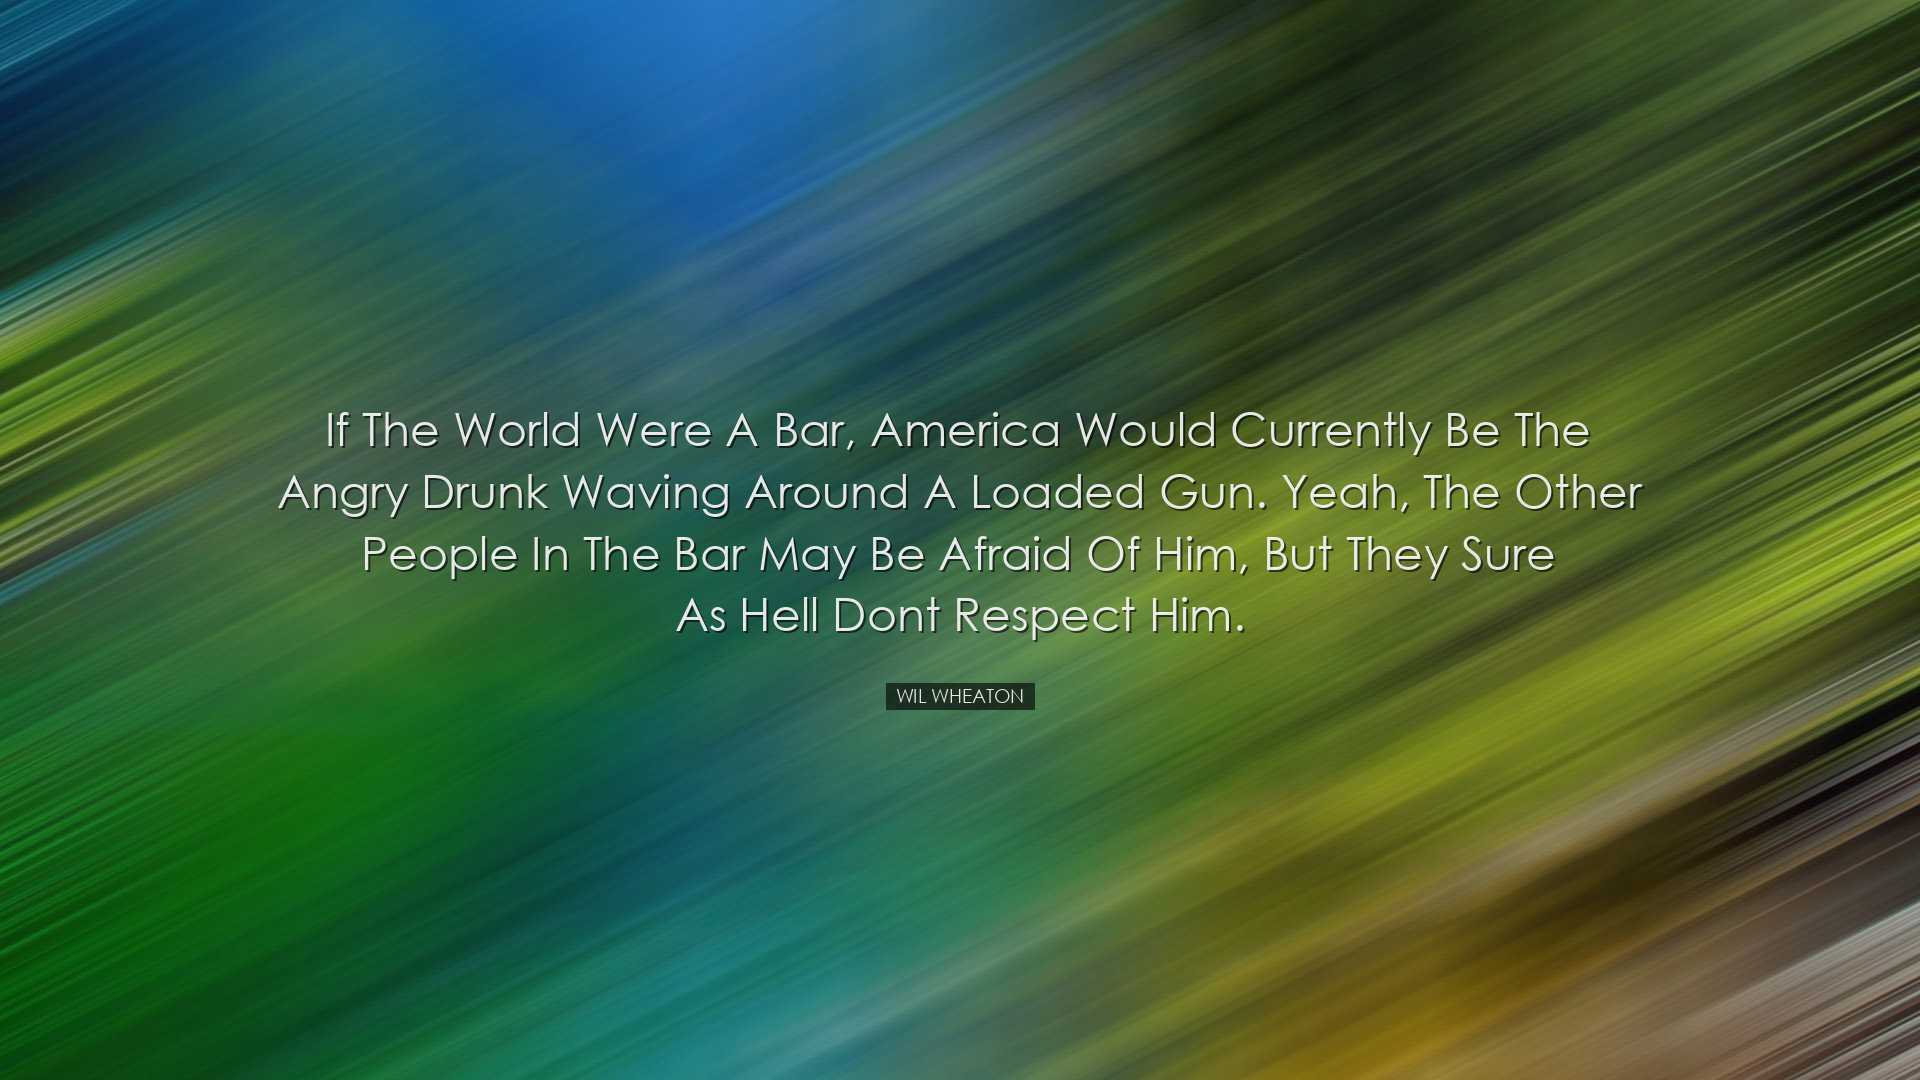 If the world were a bar, America would currently be the angry drun